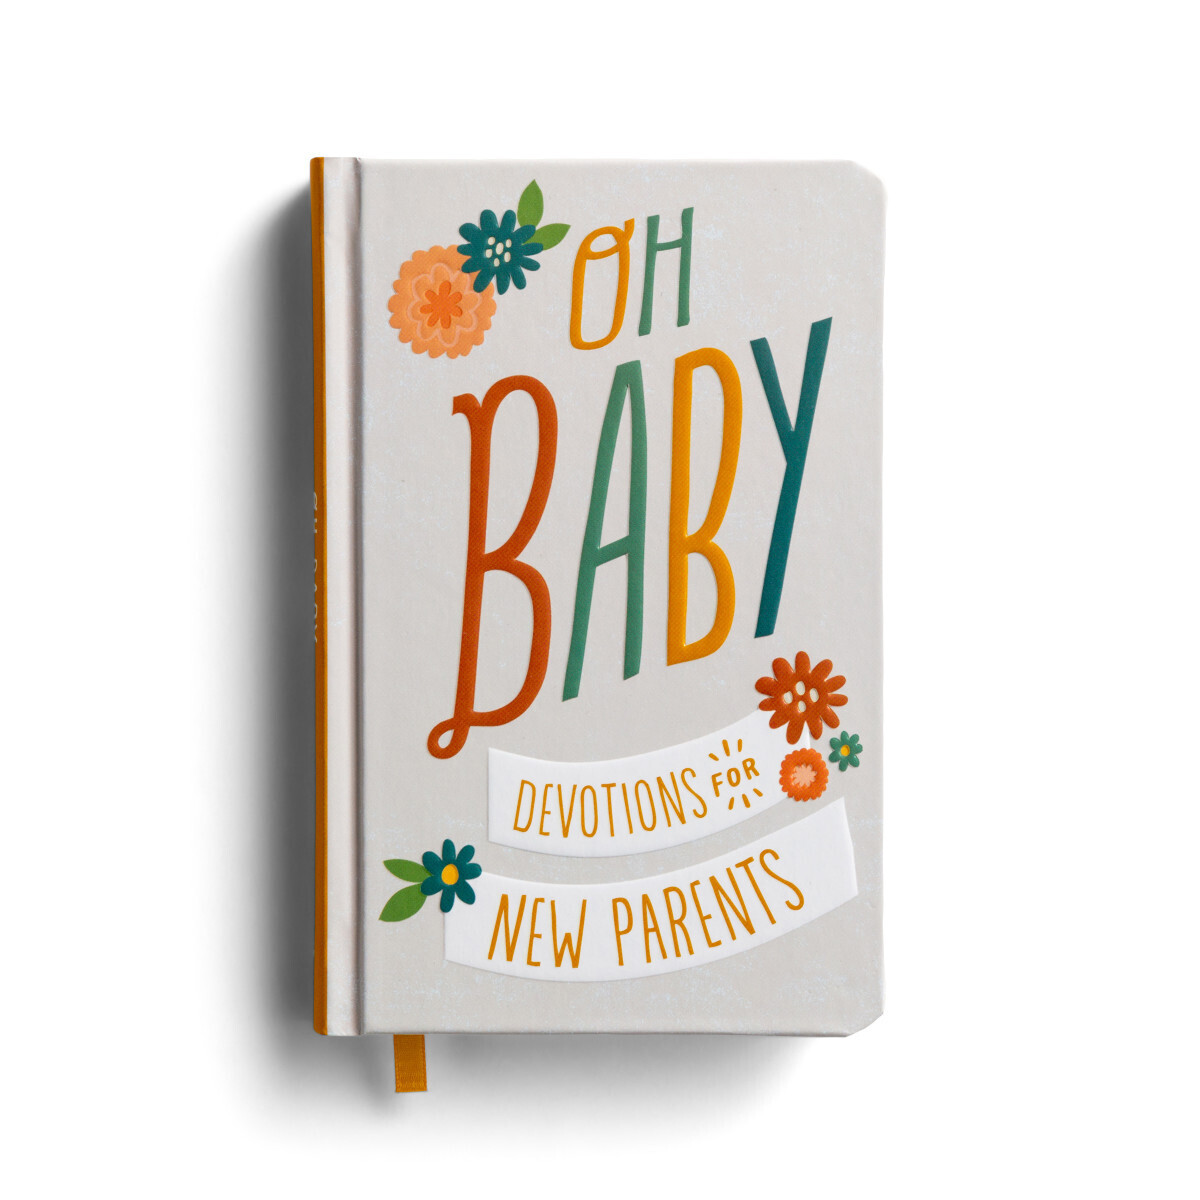 Oh Baby devotions for new parents